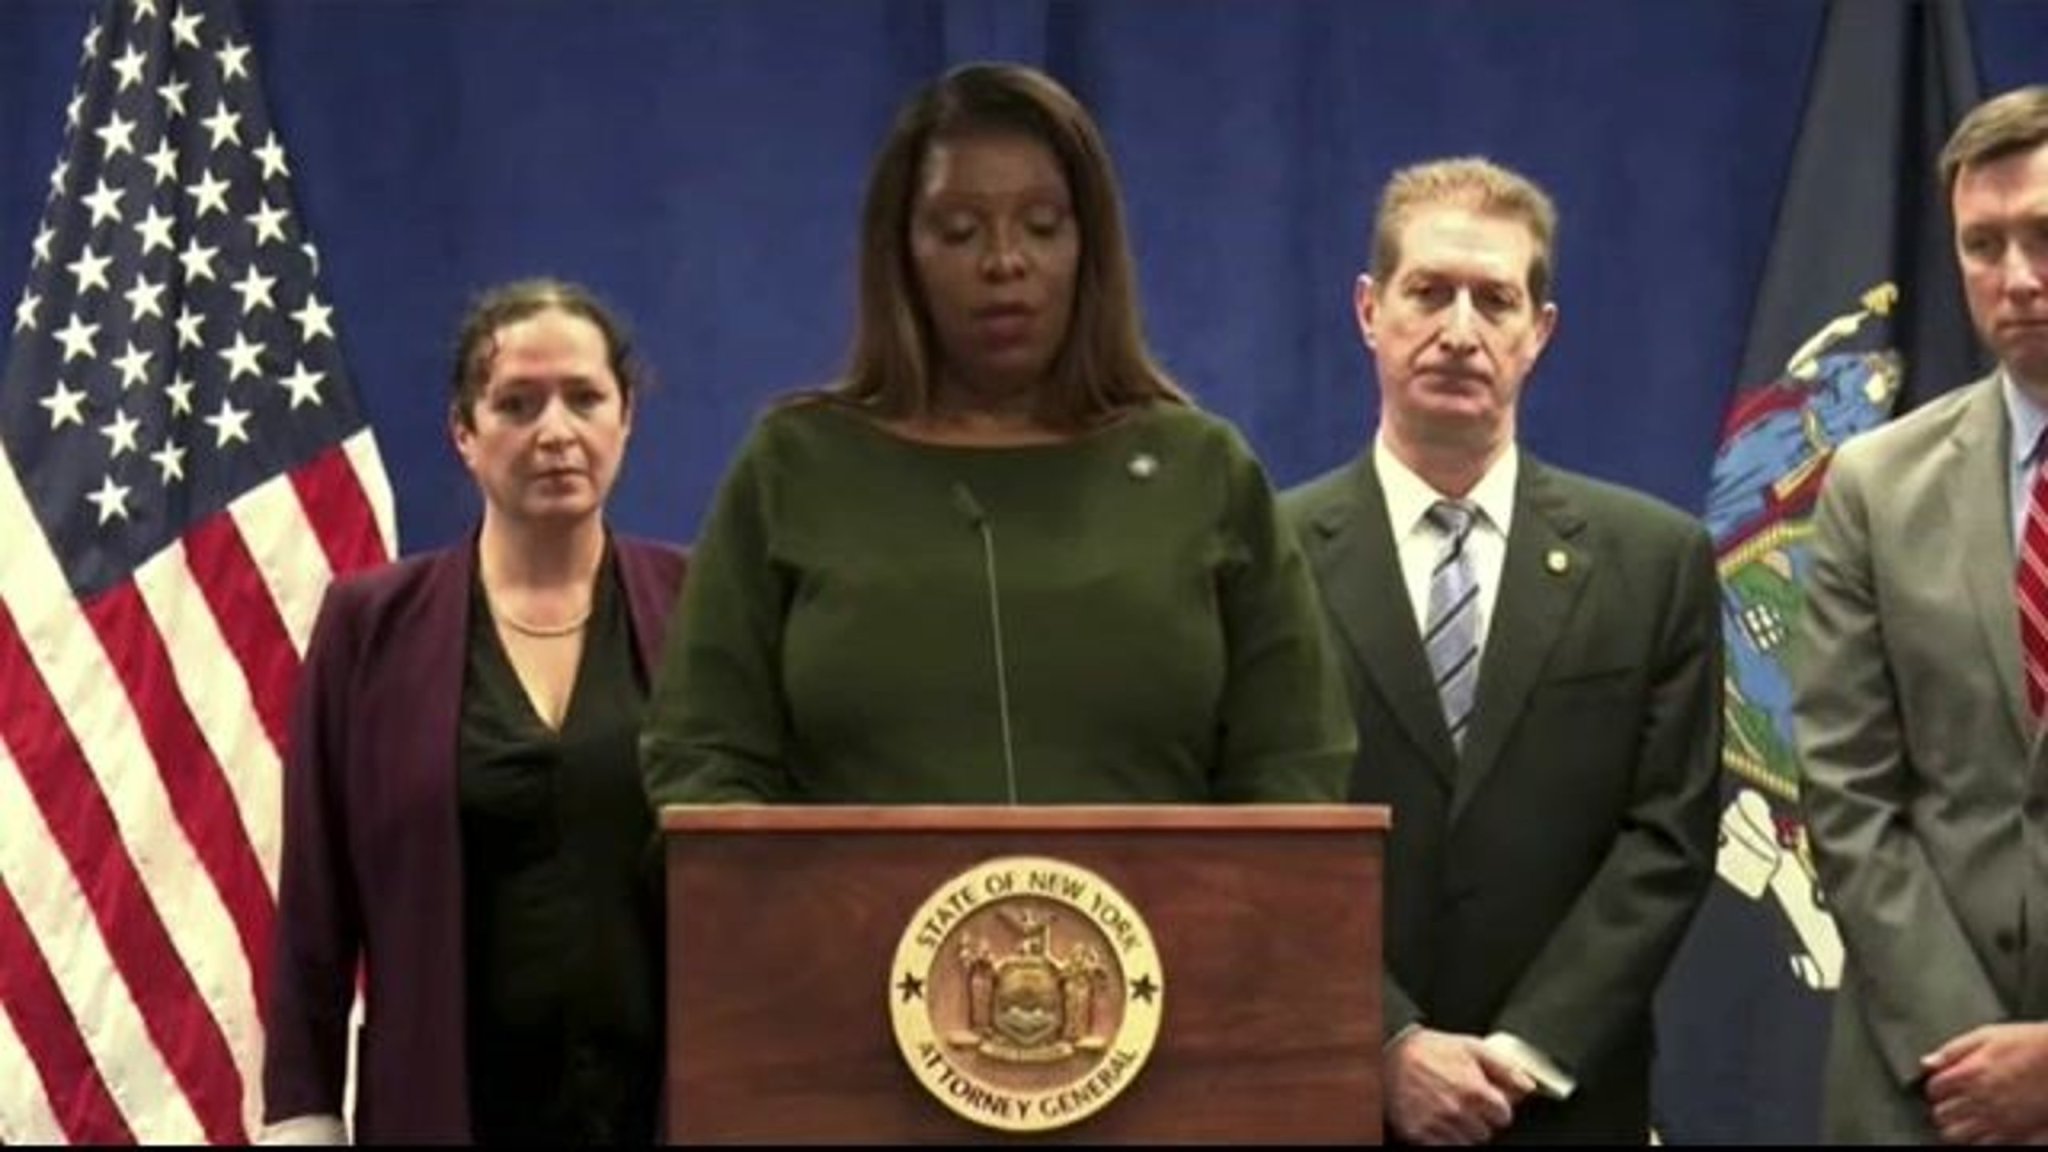 NY Attorney General Letitia James calls to “permanently prohibit any of [Trump’s] companies from doing business" in NY.